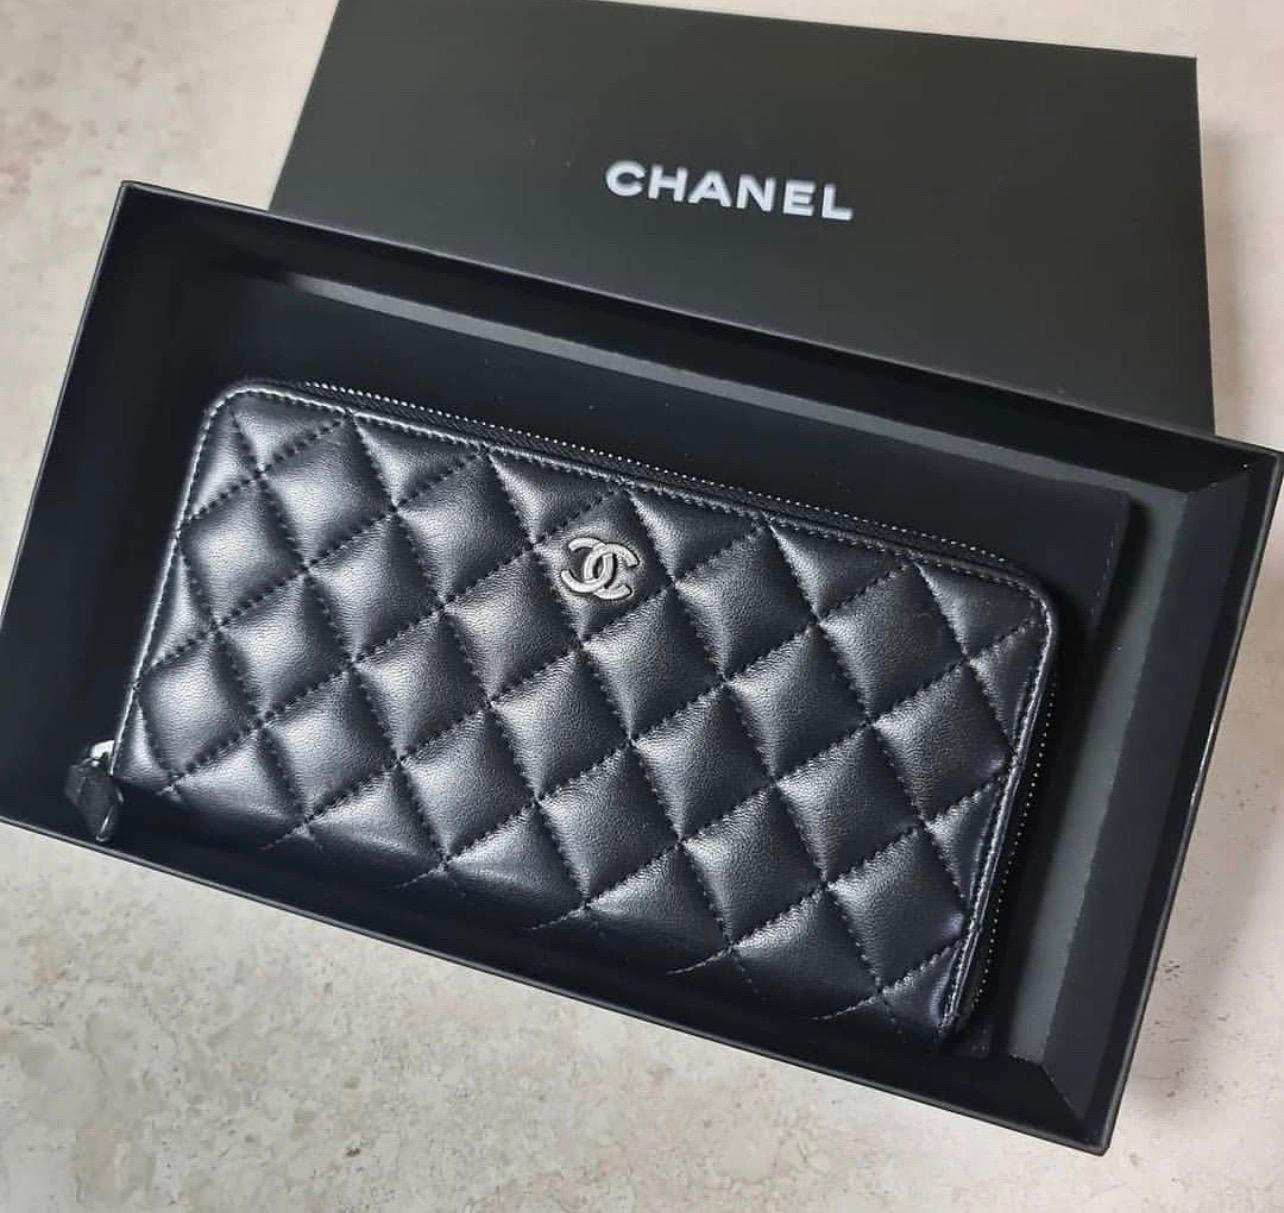 Size: 4.1 x 7.6 x 0.8 in

19*10cm

Color: Black with Silver Hardware

Come with Original Chanel box, dust bag, authenticity card.

For buyers from EU we can provide shipping from Poland. Please demand if you need.